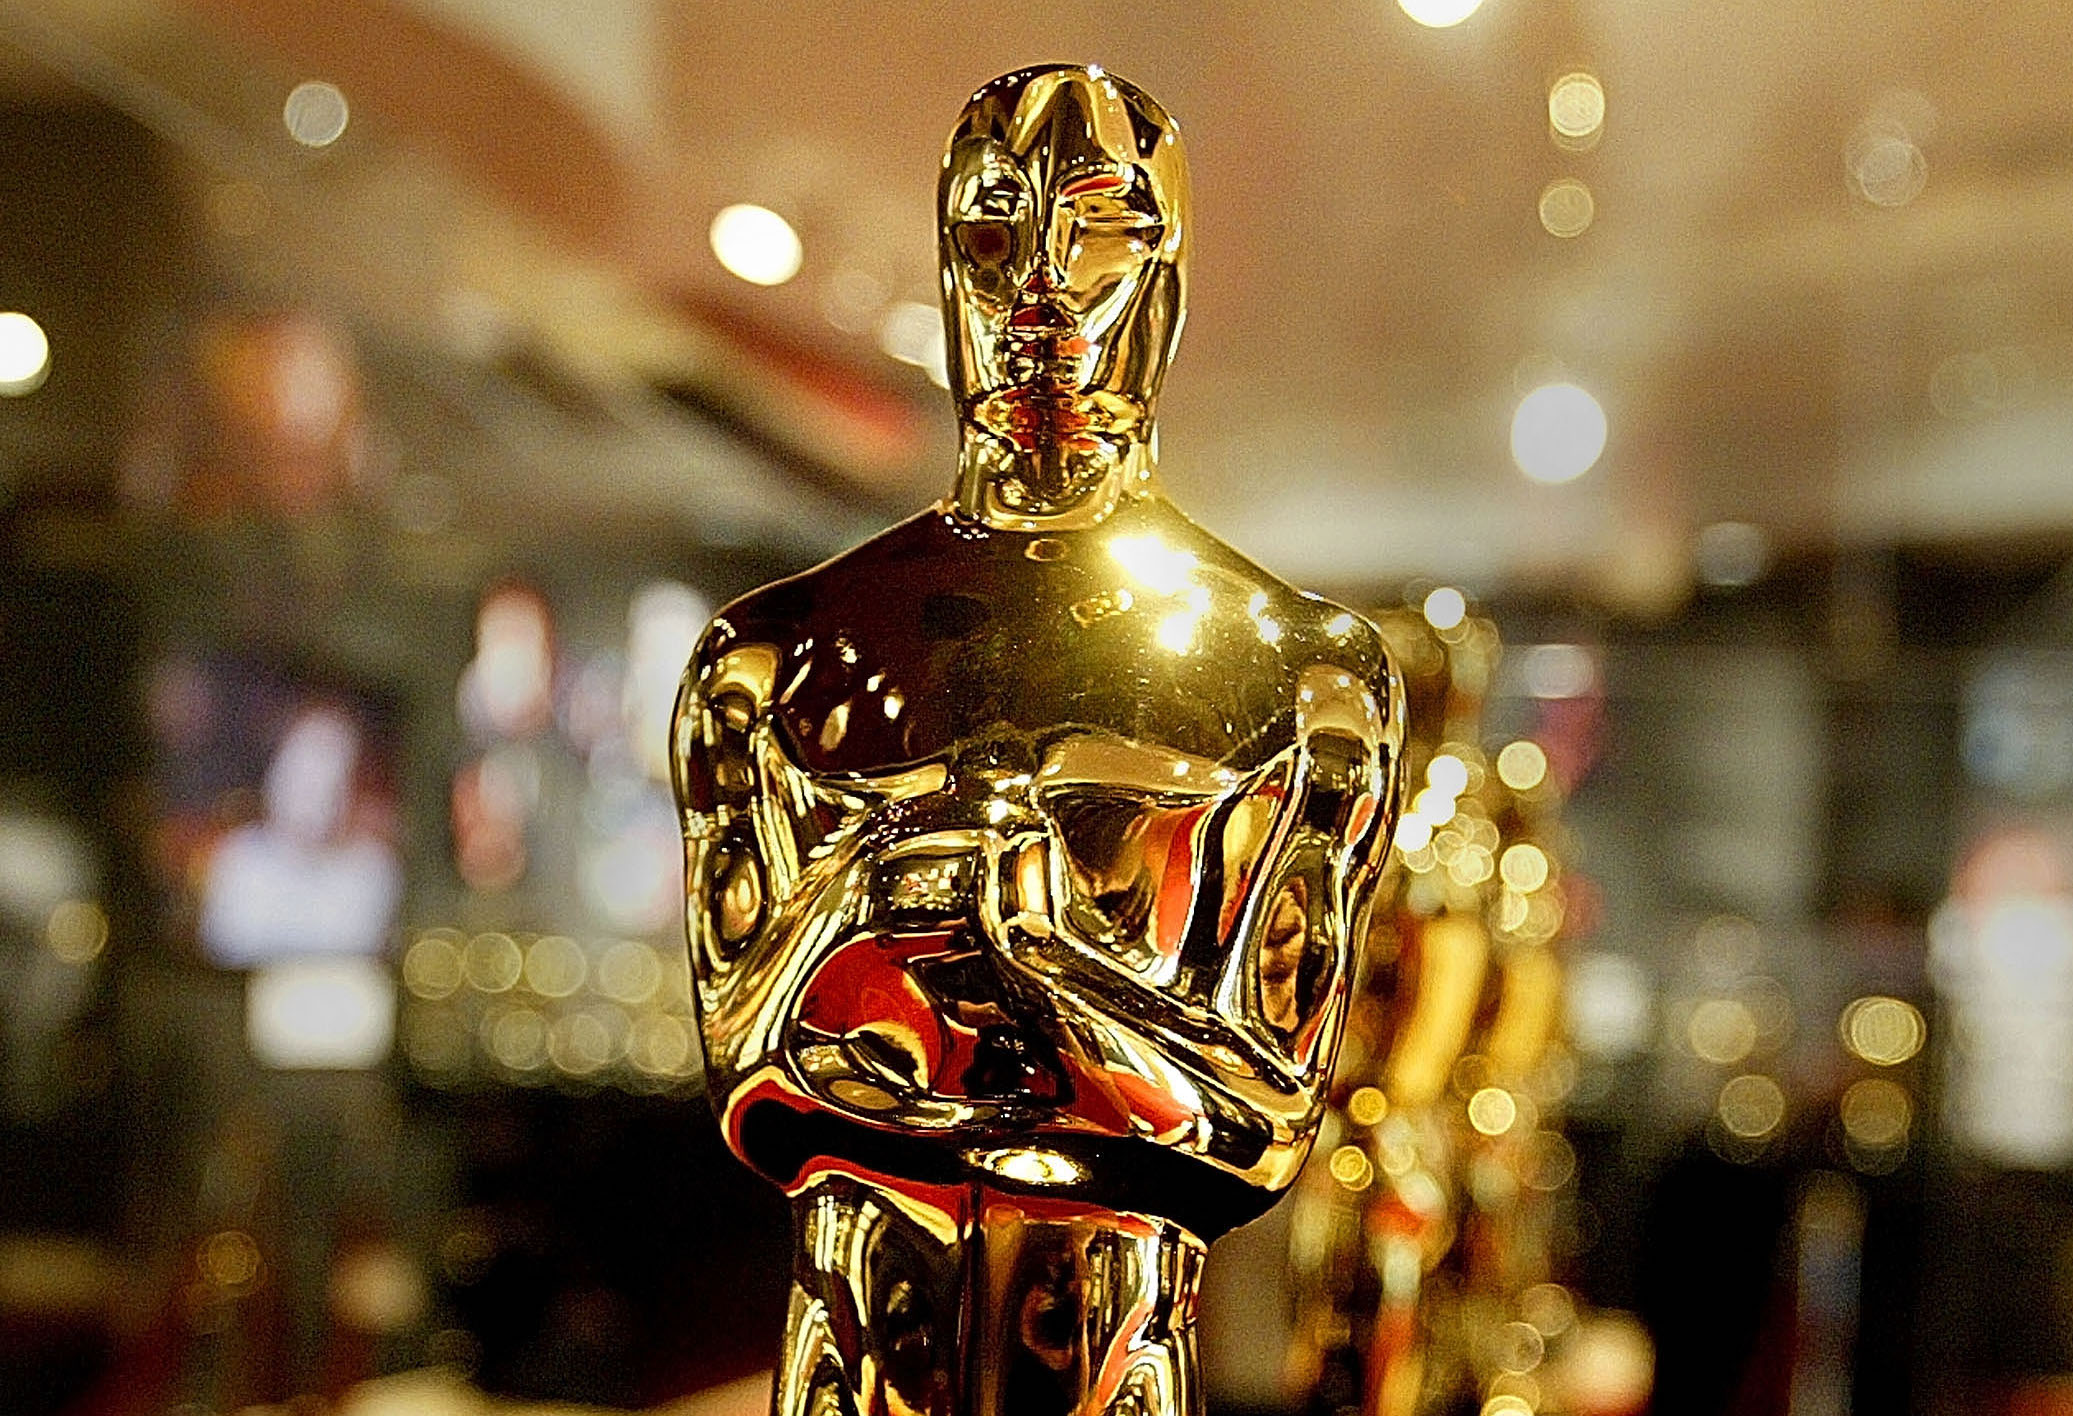 Oscars See First Bump In Ratings Since 2020, But Still Suffering To Get Numbers Pre-Pandemic